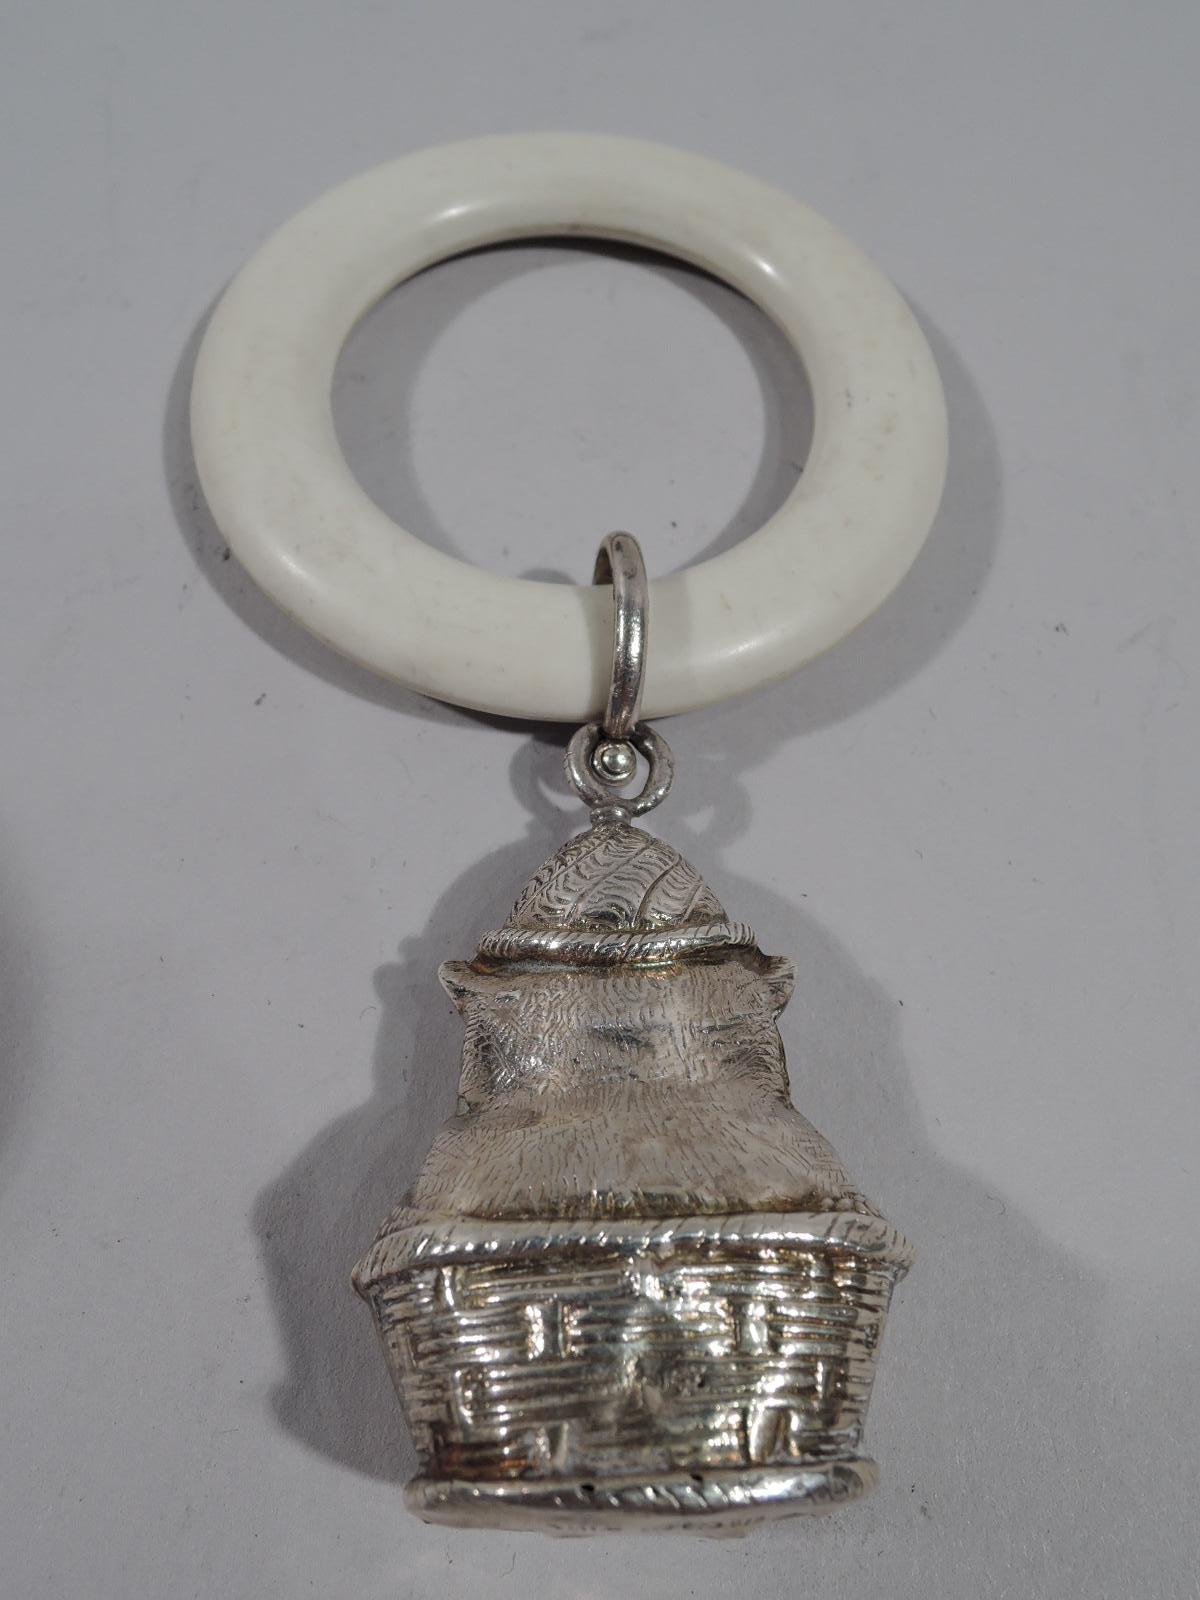 George V sterling silver baby rattle. Made by WH Collins & Co. in Birmingham in 1932. Flat and round ring with loose-mounted figural pendant: A cat in a basket with self-satisfied expression and fat paws. Nice jangly sound. Fully marked.